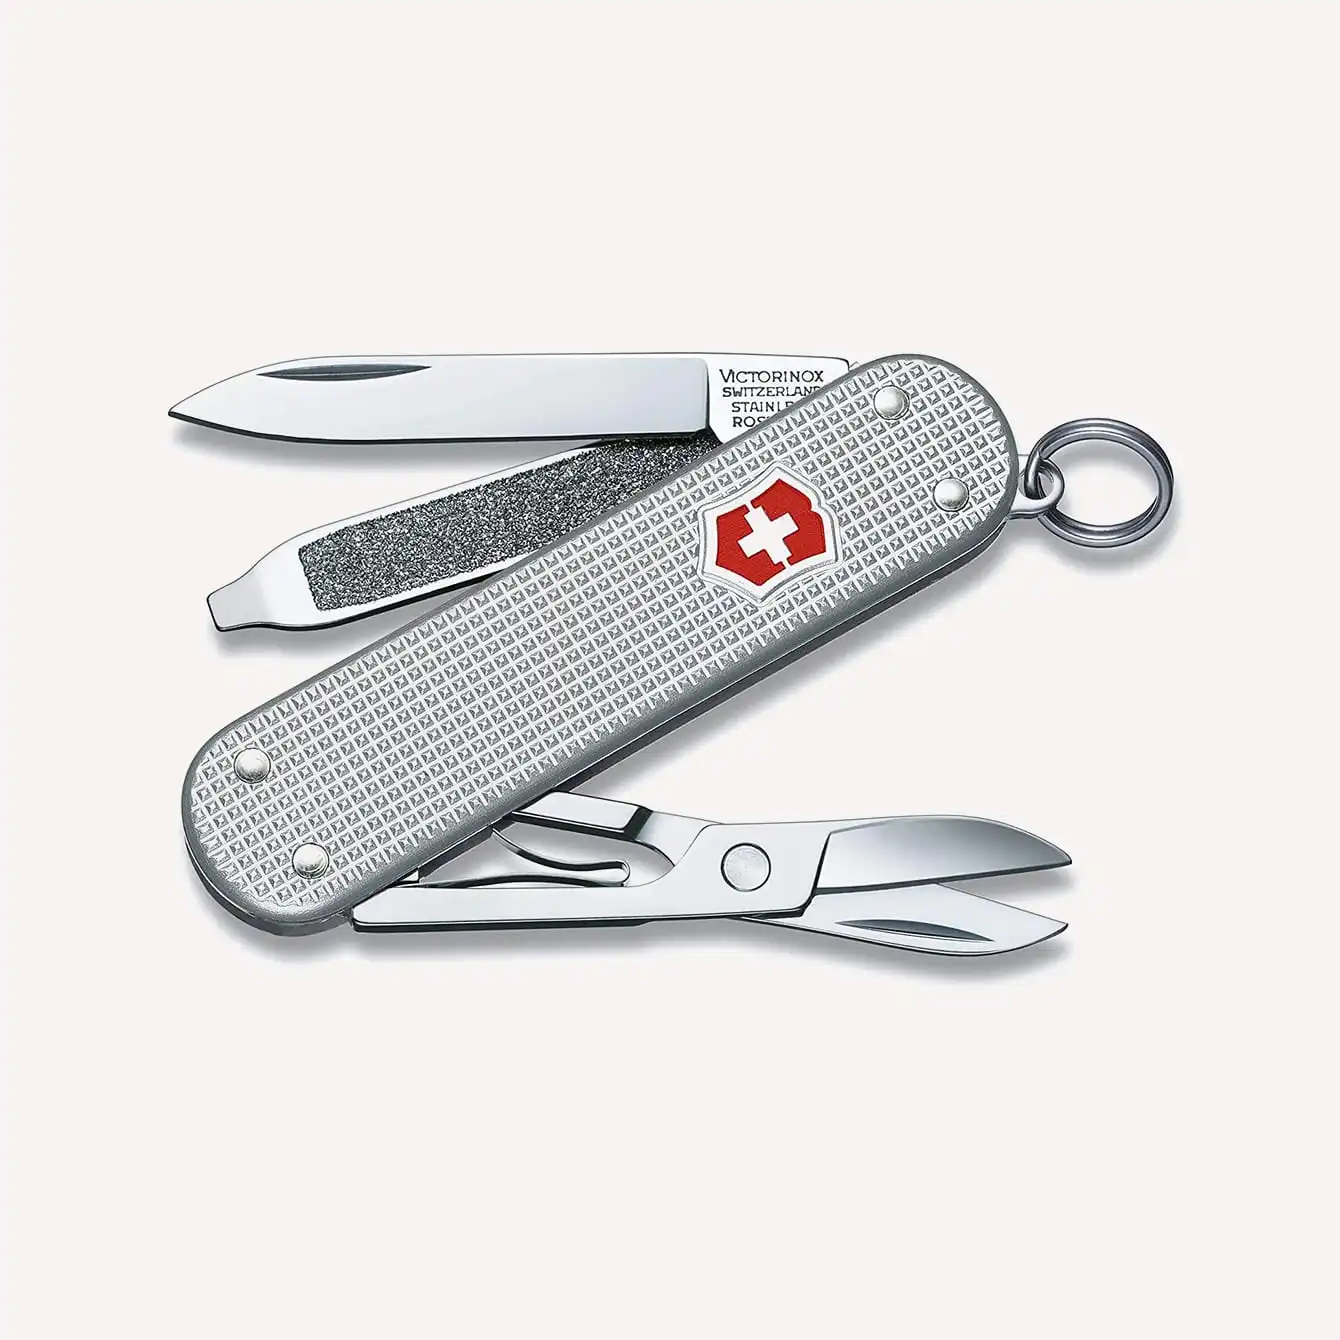 Swiss imported Vickers Swiss Army Knife portable ultra-thin EDC